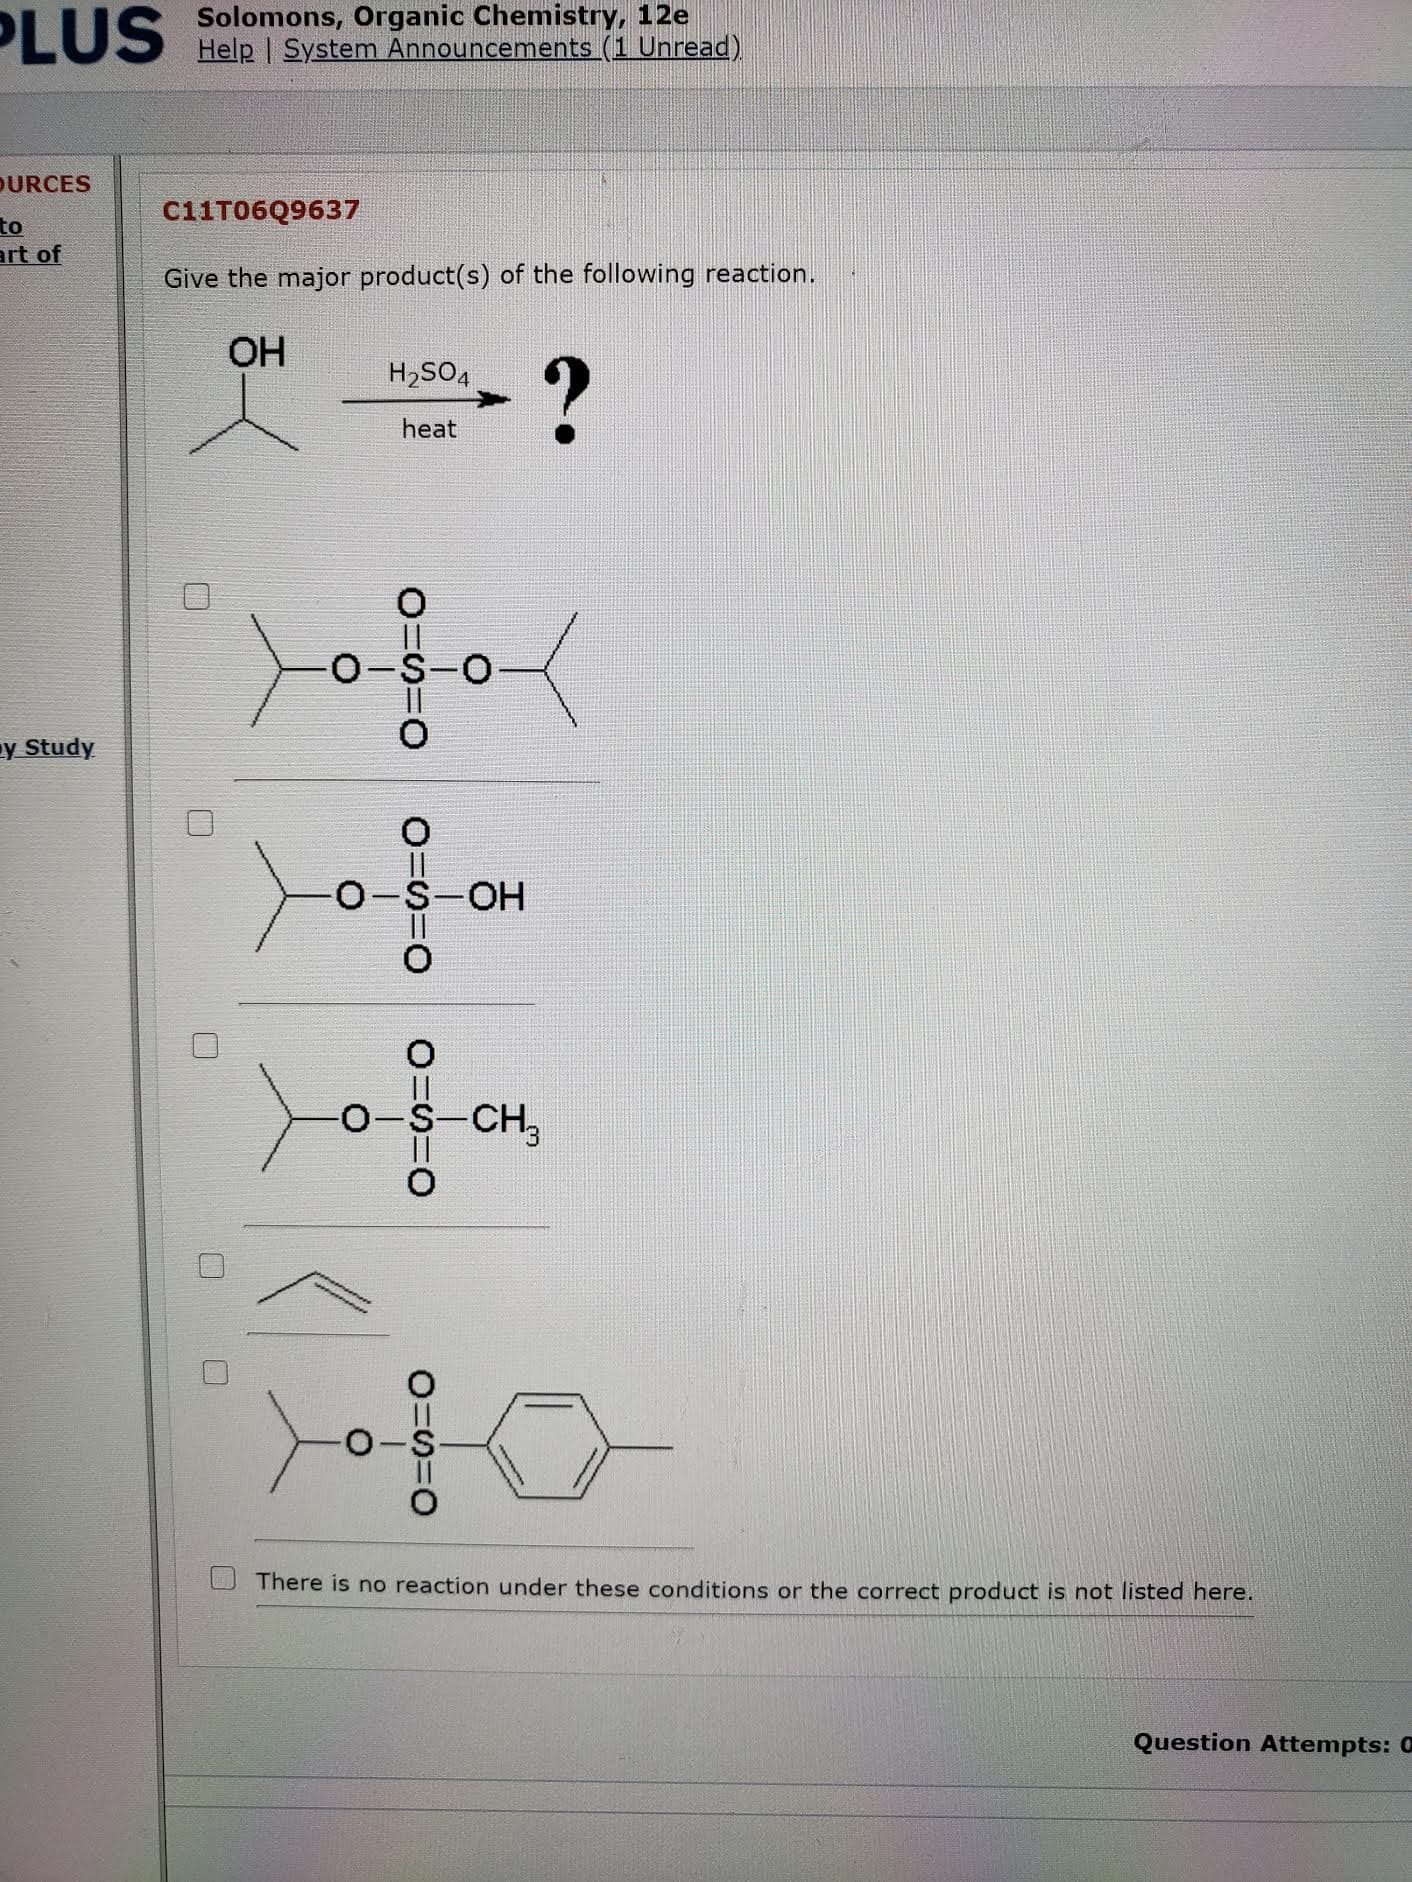 Give the major product(s) of the following reaction.
OH
H2SO4
heat
0-S-O
0-S-OH
0-S-CH
There is no reaction under these conditions or the
